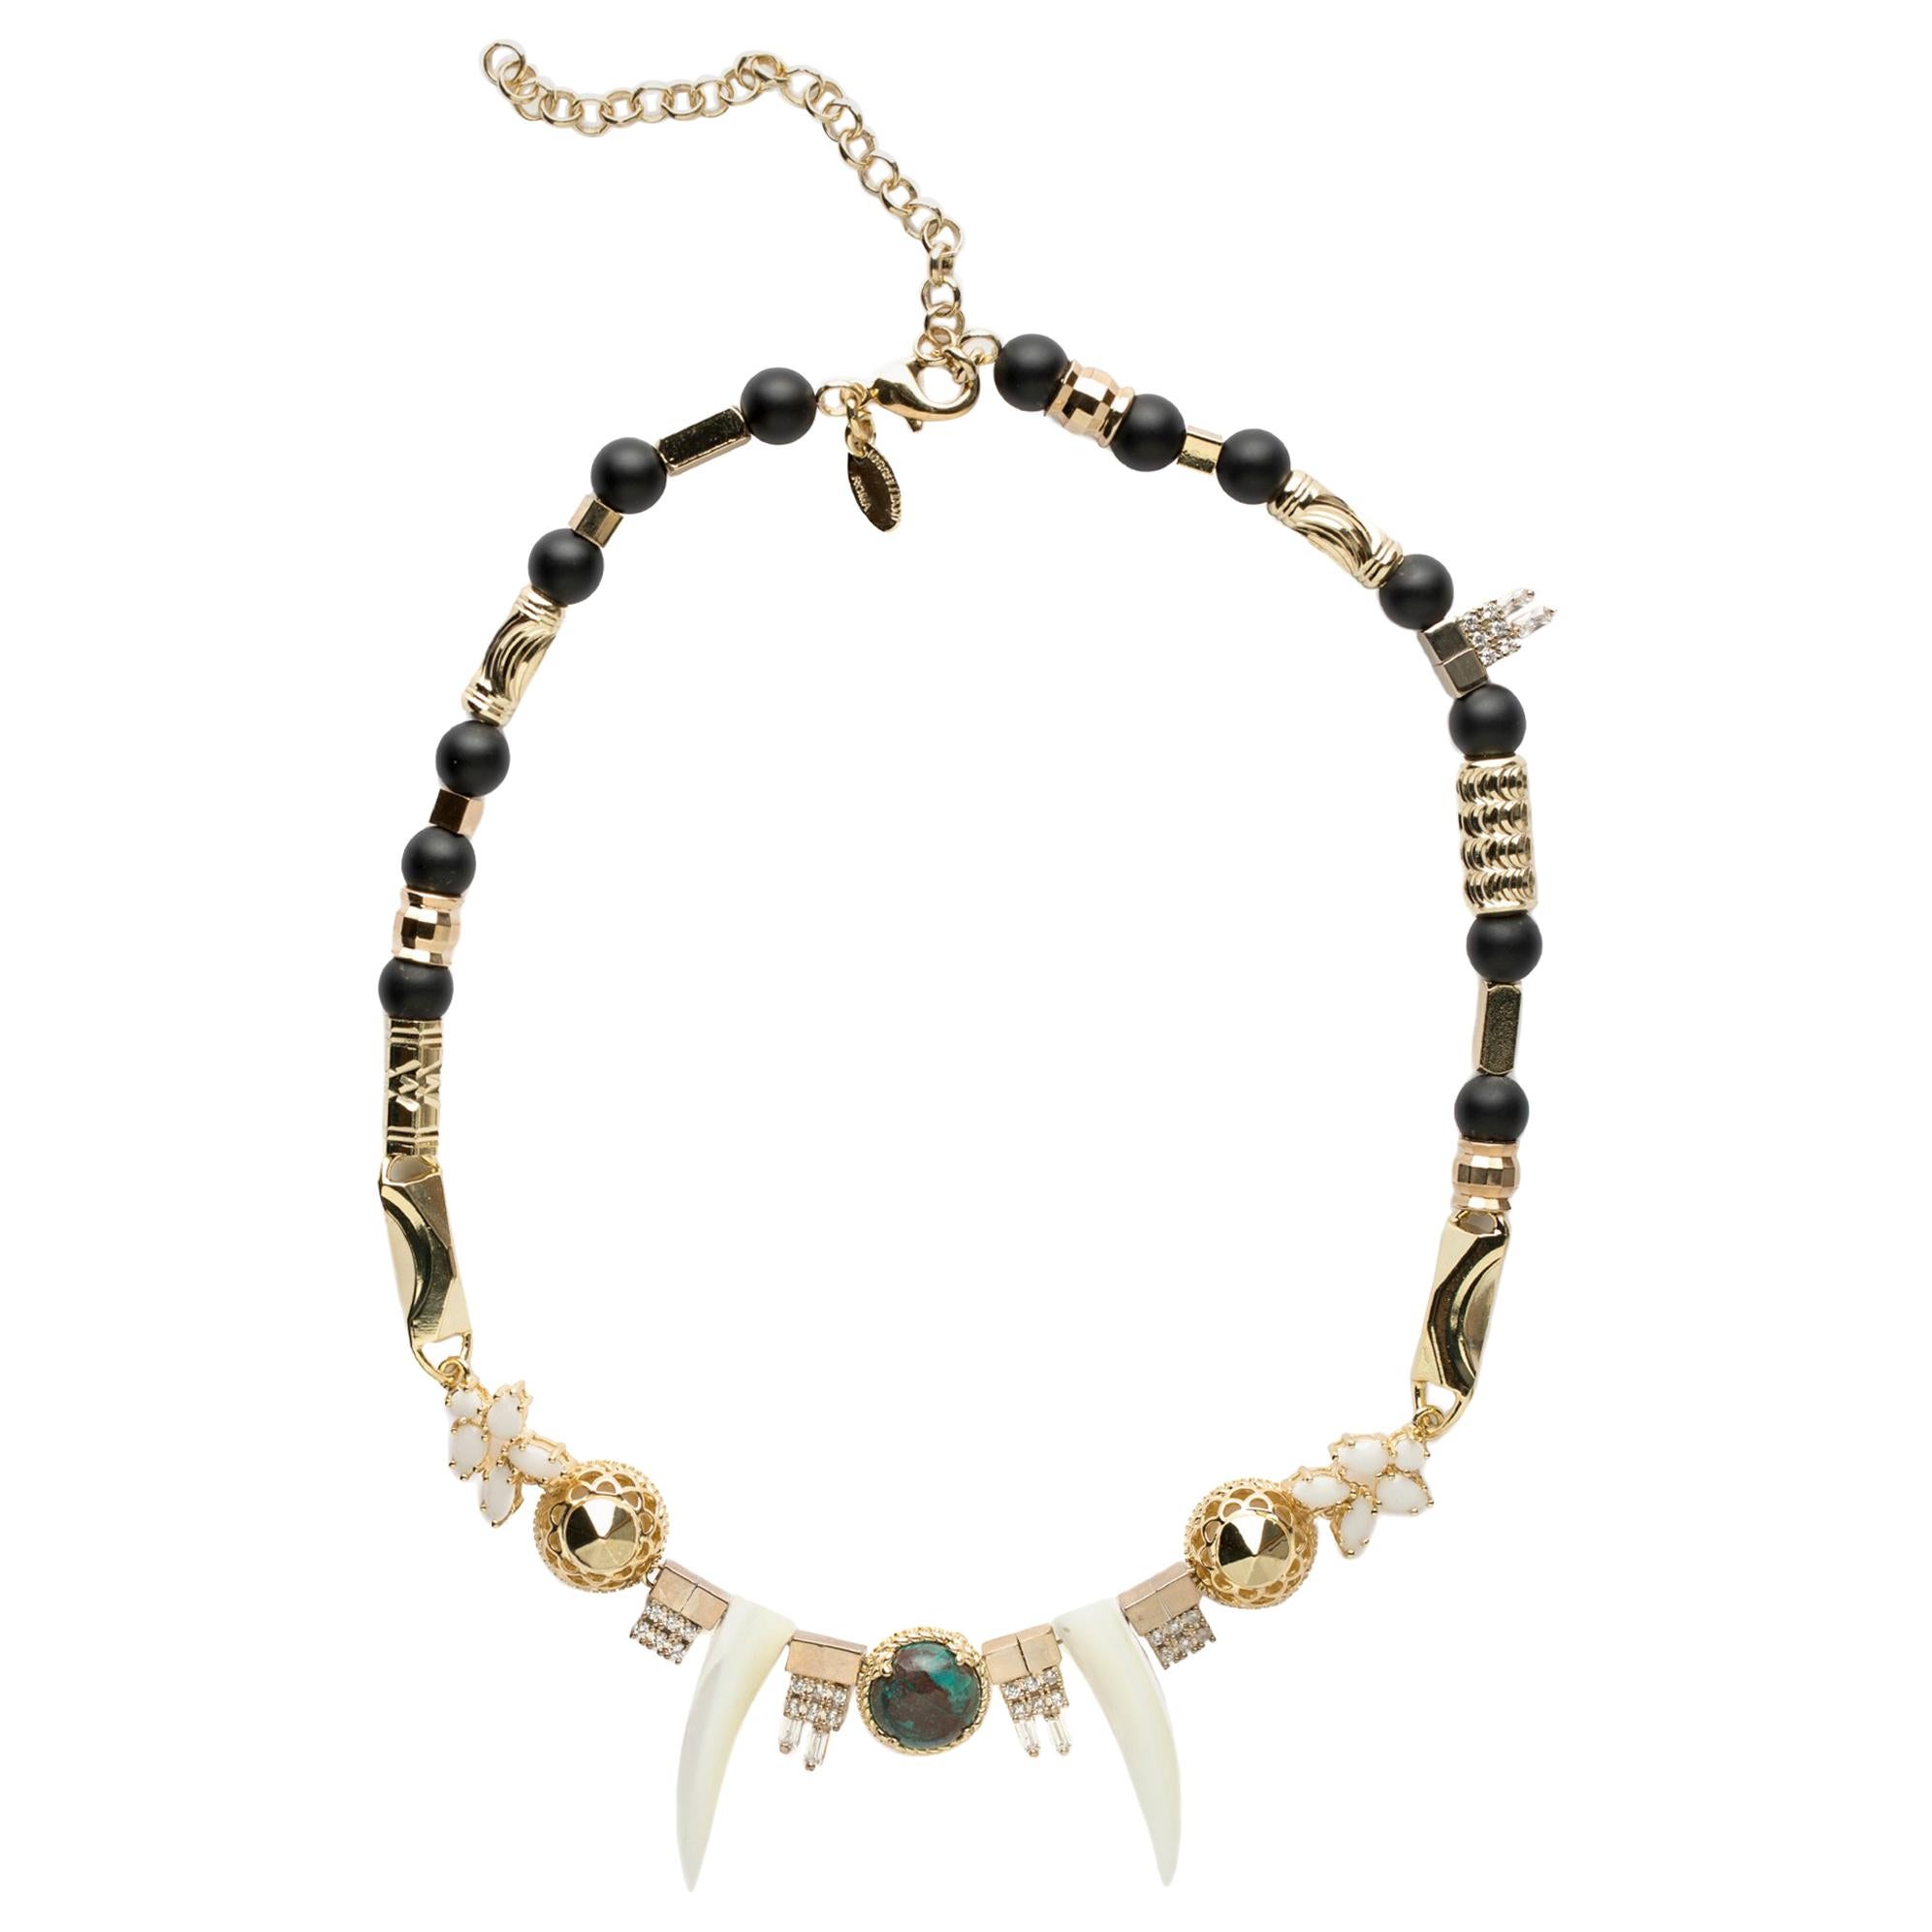 Black Agate Beads Nacre Tribal Necklace from Iosselliani For Sale